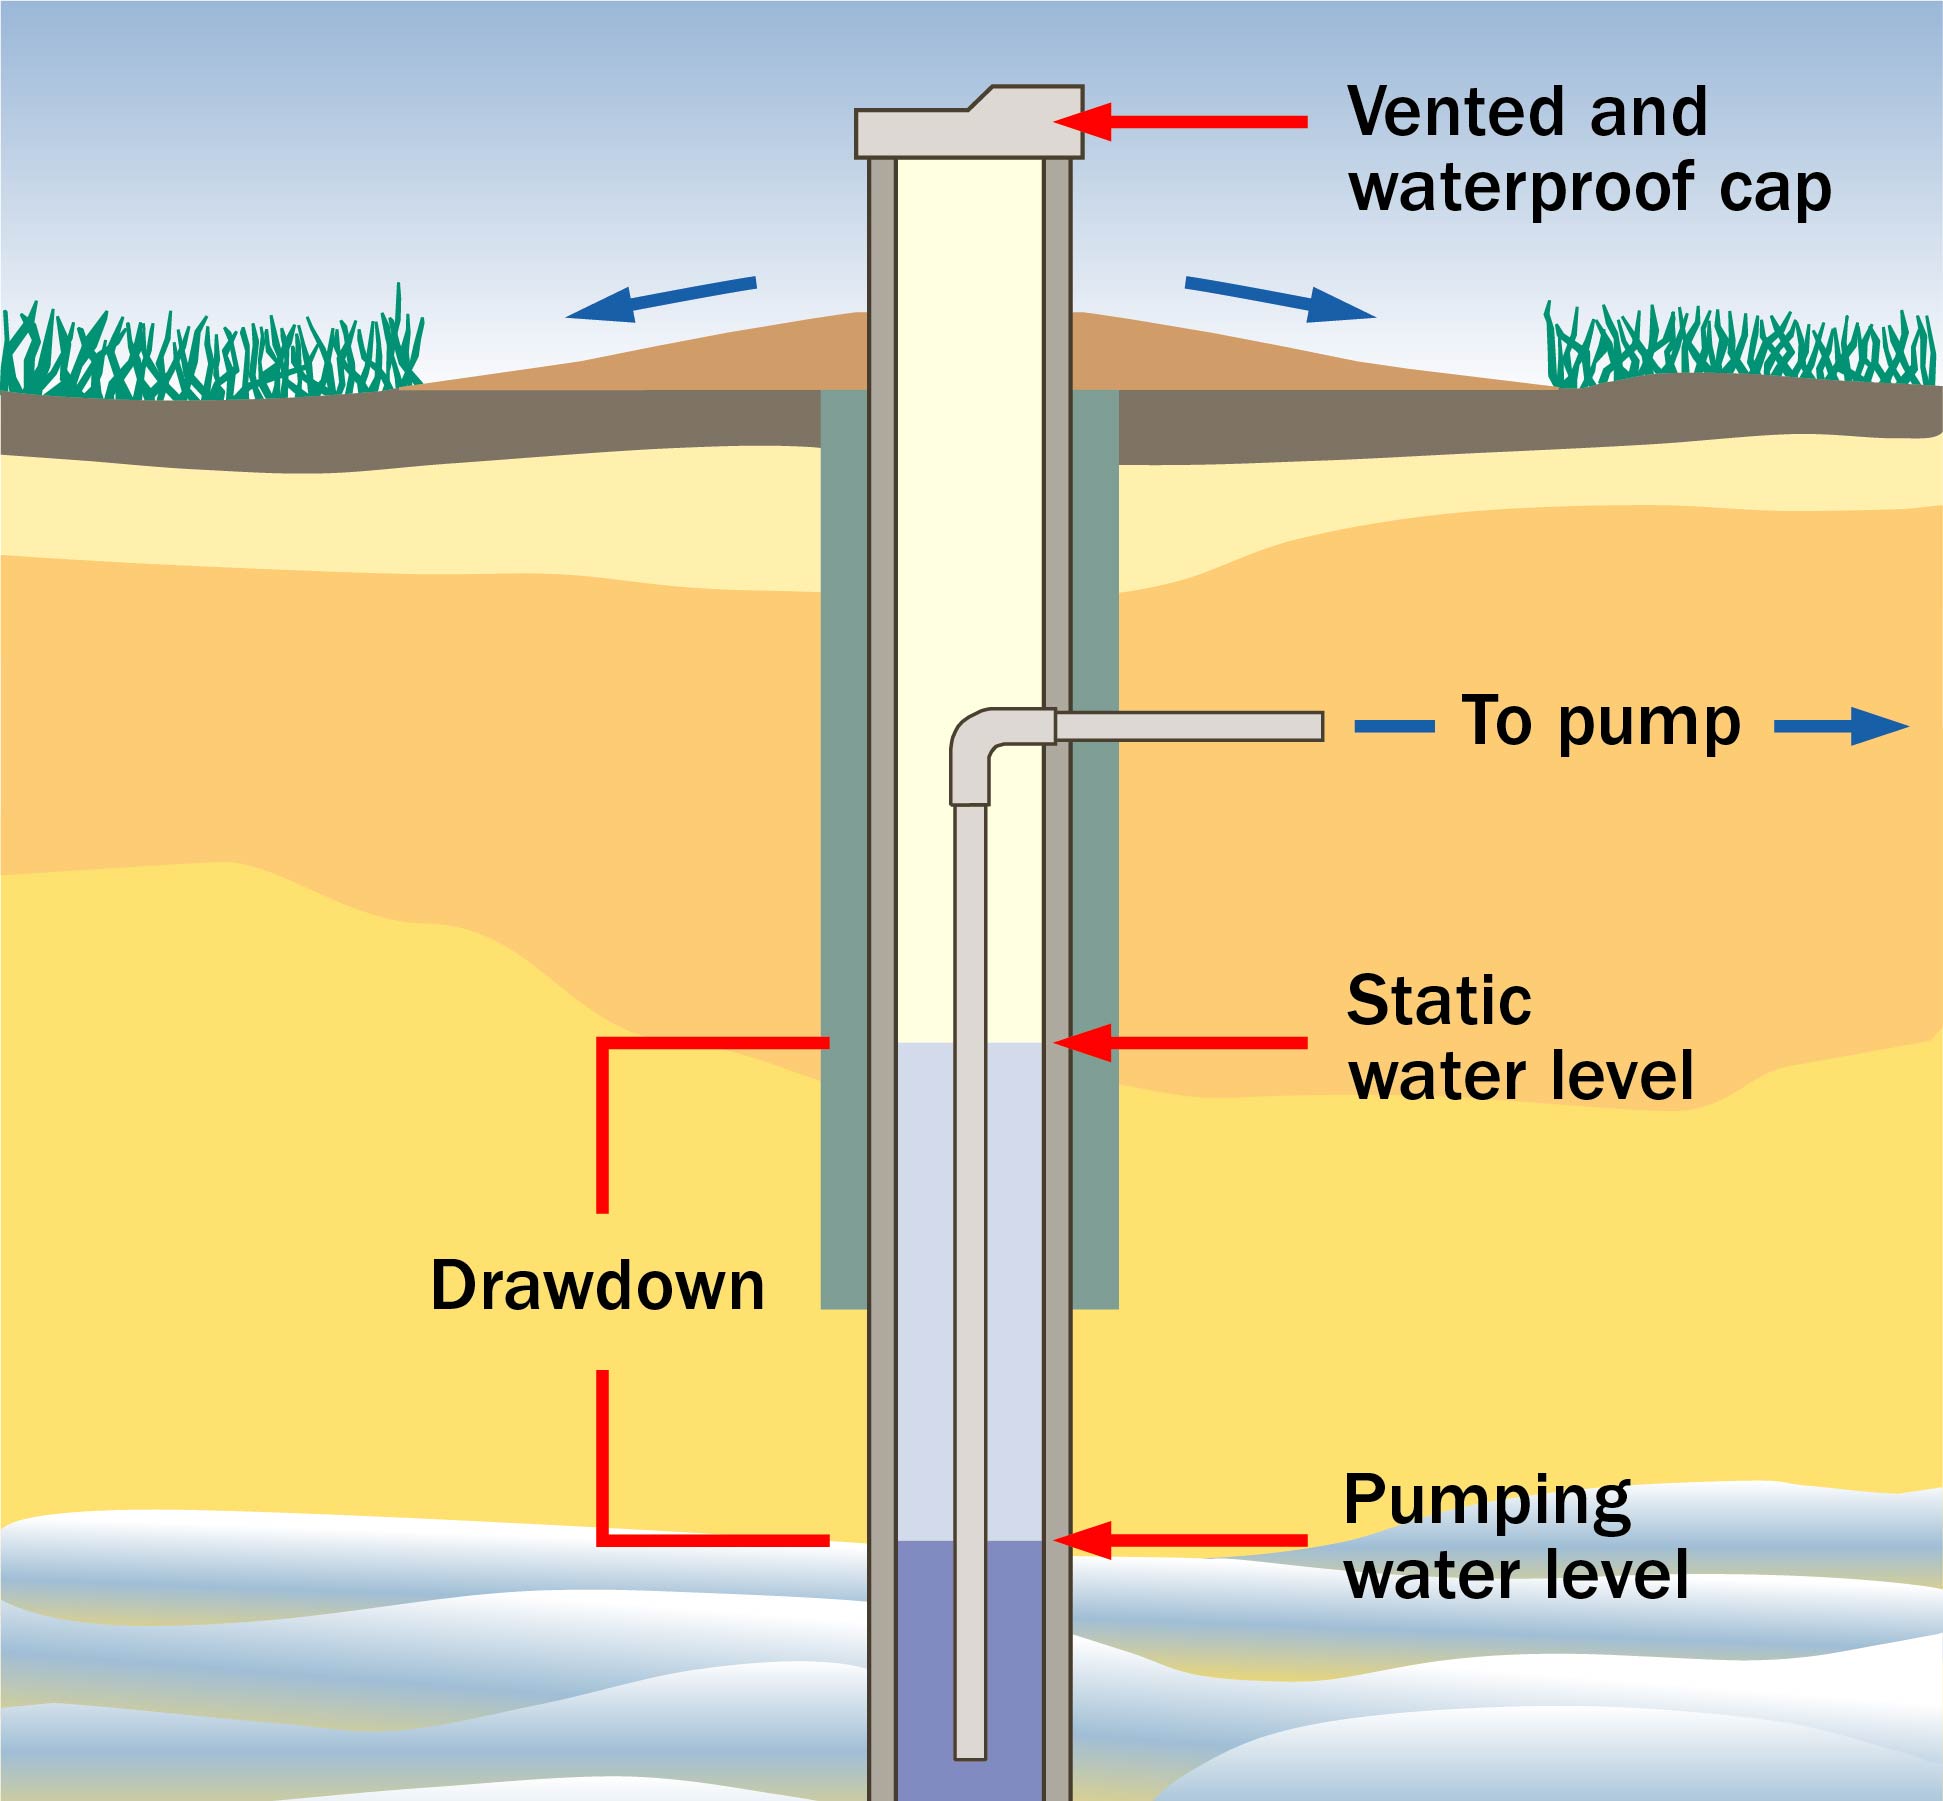 the facts about groundwater sustainability, groundwater hydrology